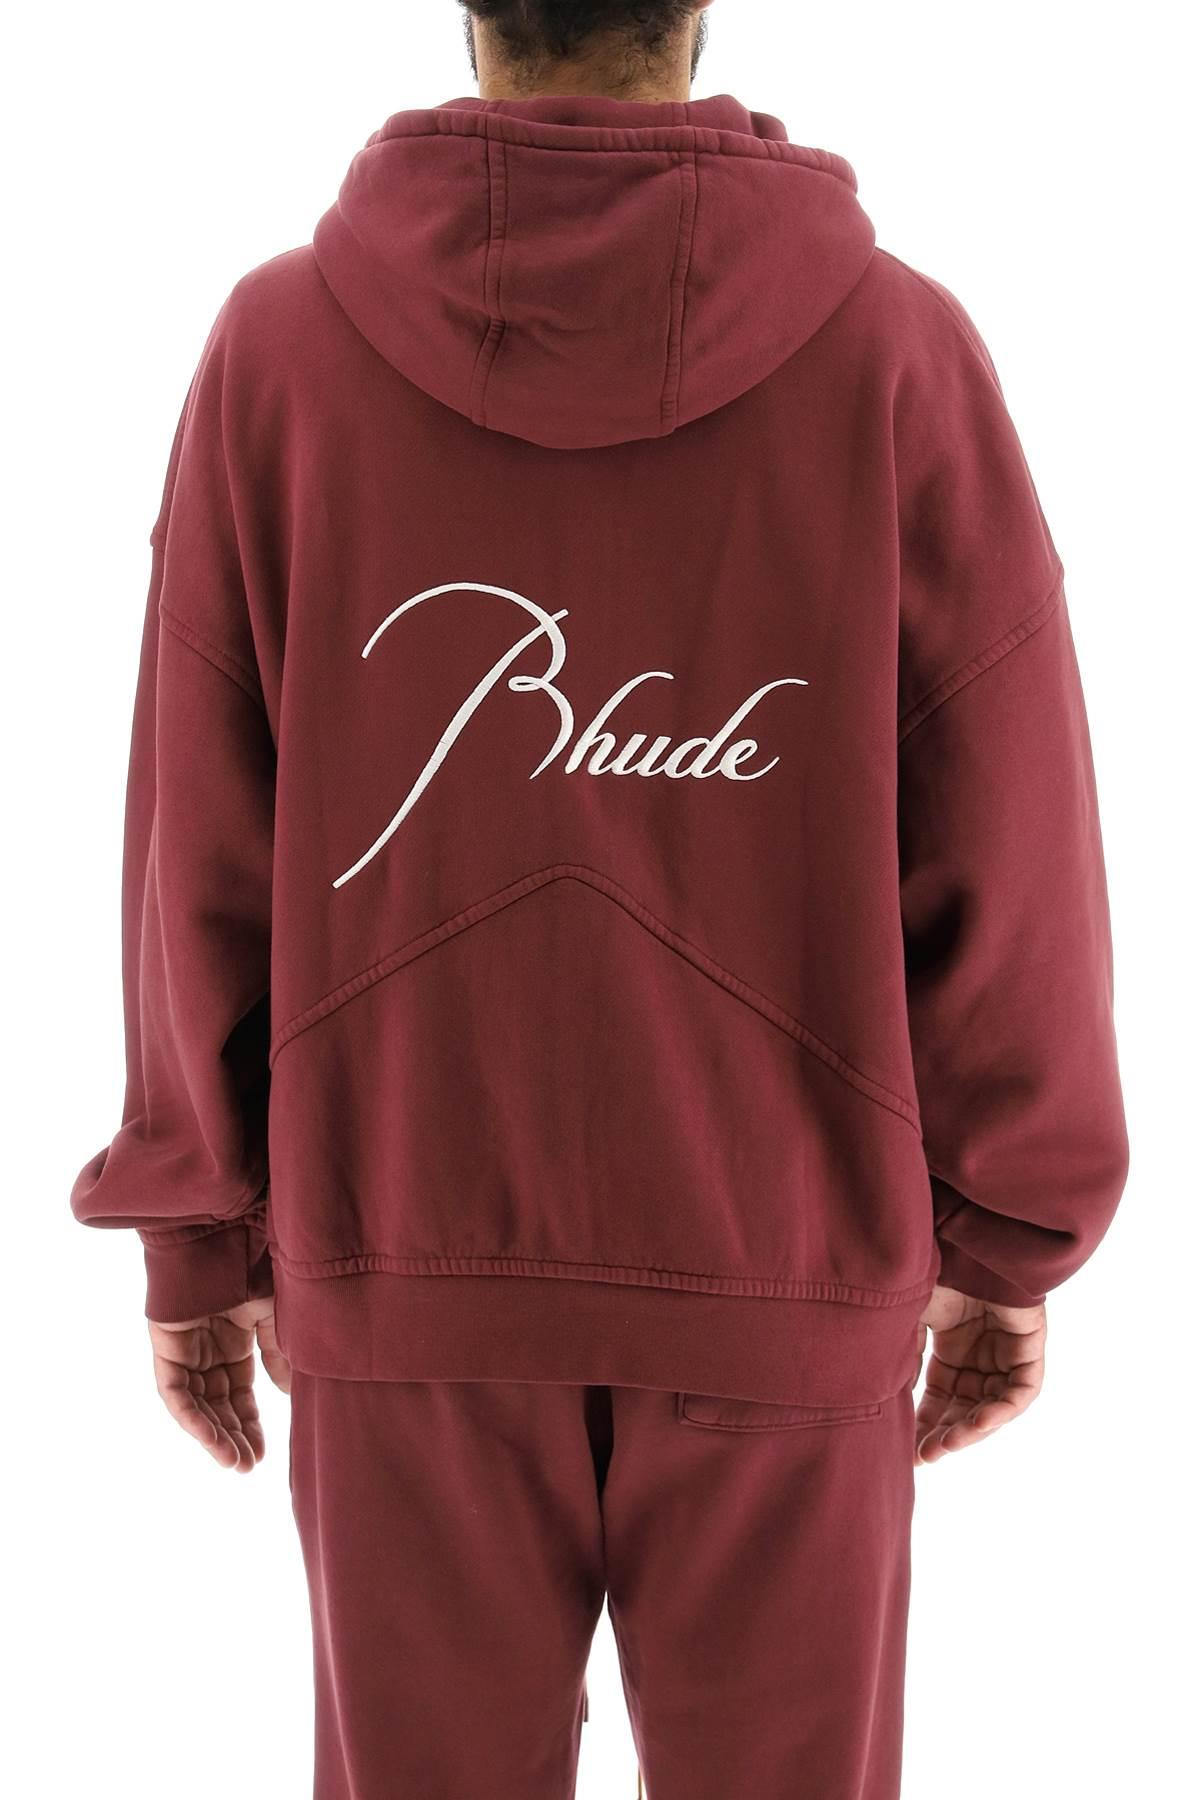 Rhude Cotton Zip-up Hoodie With Logo Embroidery in Red for Men gym and workout clothes gym and workout clothes Rhude Activewear Save 22% Mens Activewear 